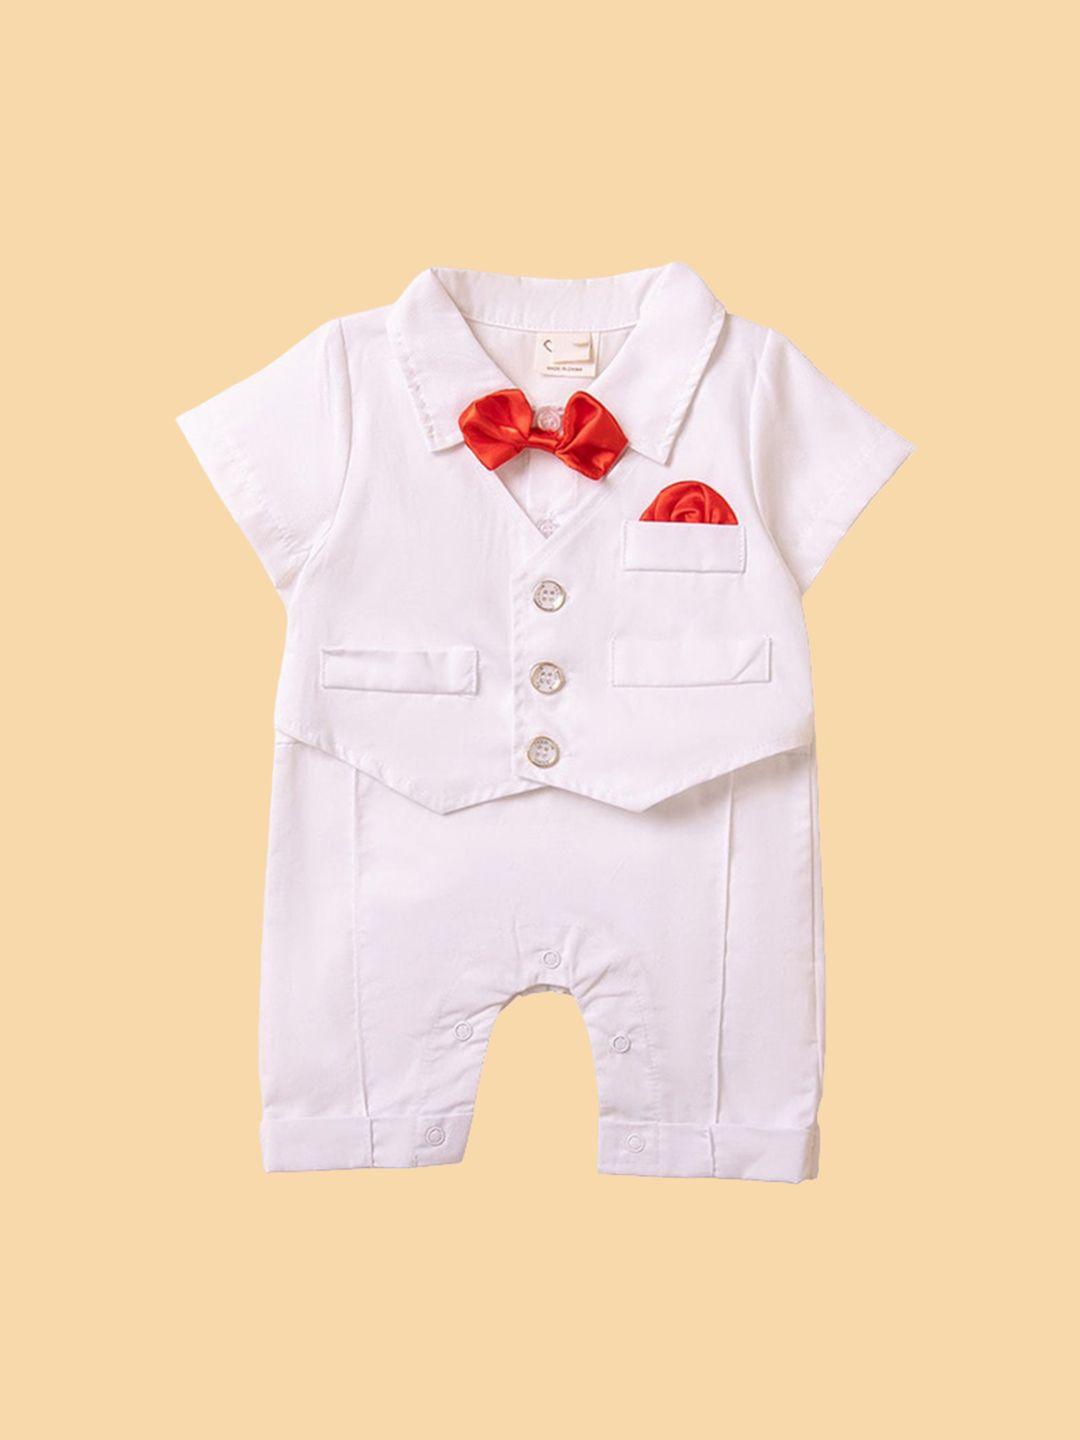 stylecast infants boys white cotton rompers